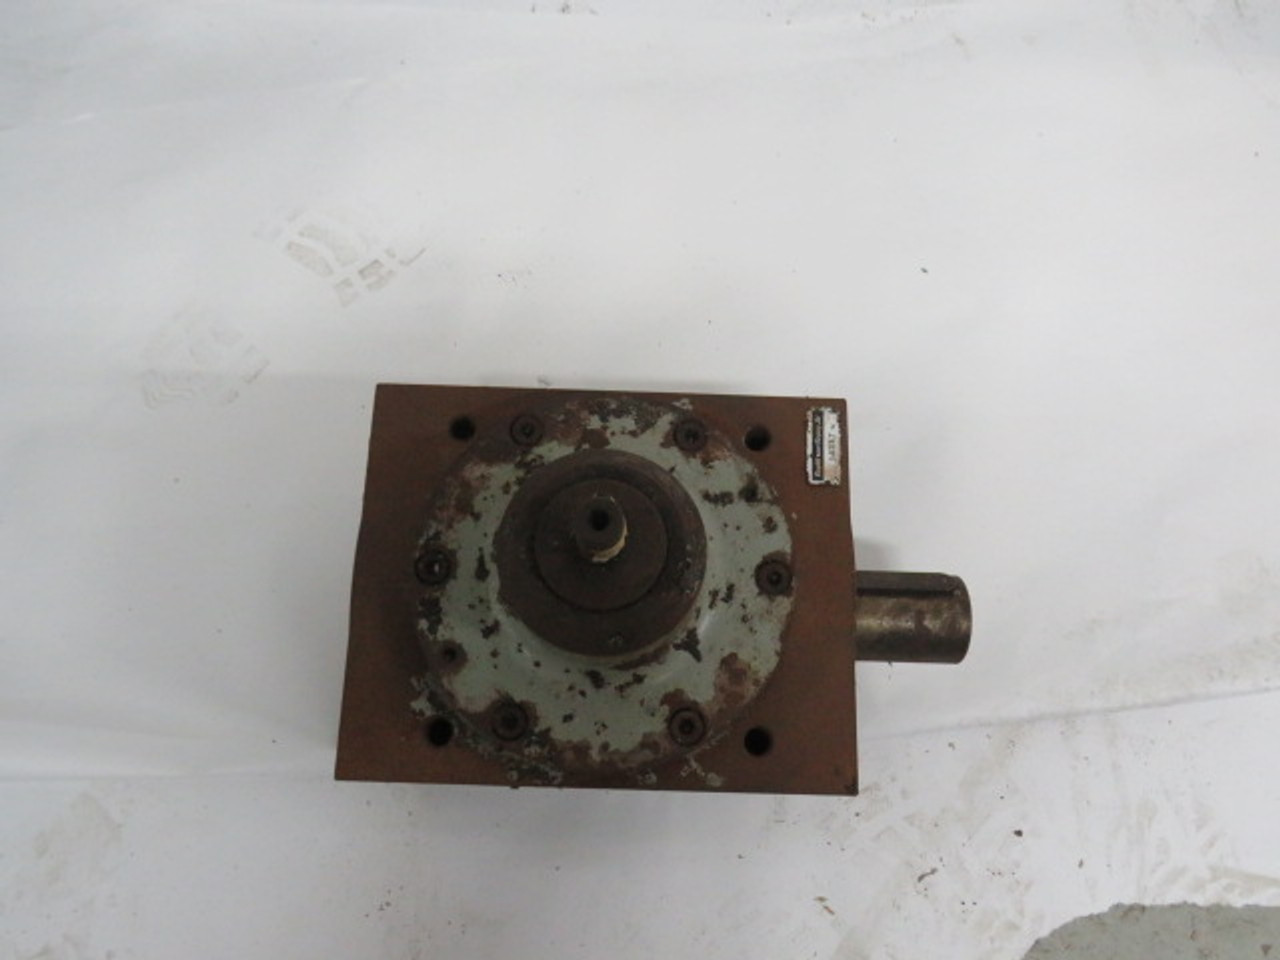 Tandler Bevel Gearbox Gear Reducer 11:9 Ratio 42mm Input 42mm Output USED